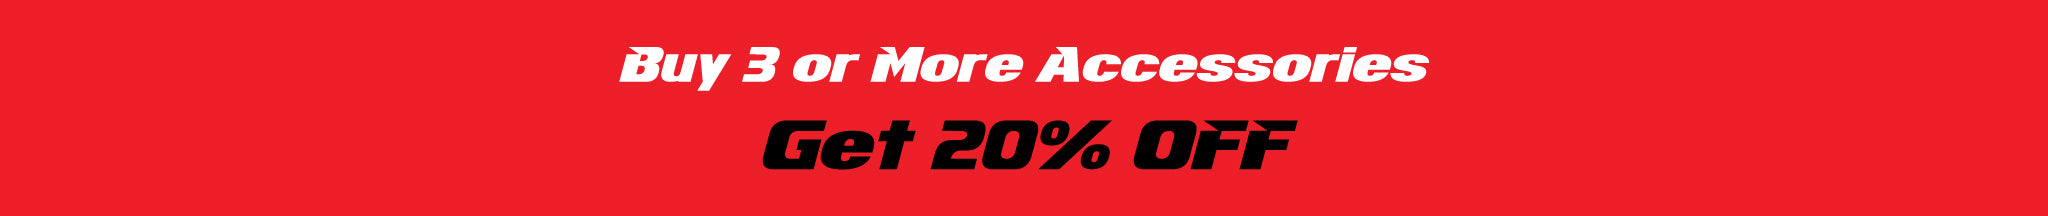 Buy 3 or More, Get 20% Off Accessories